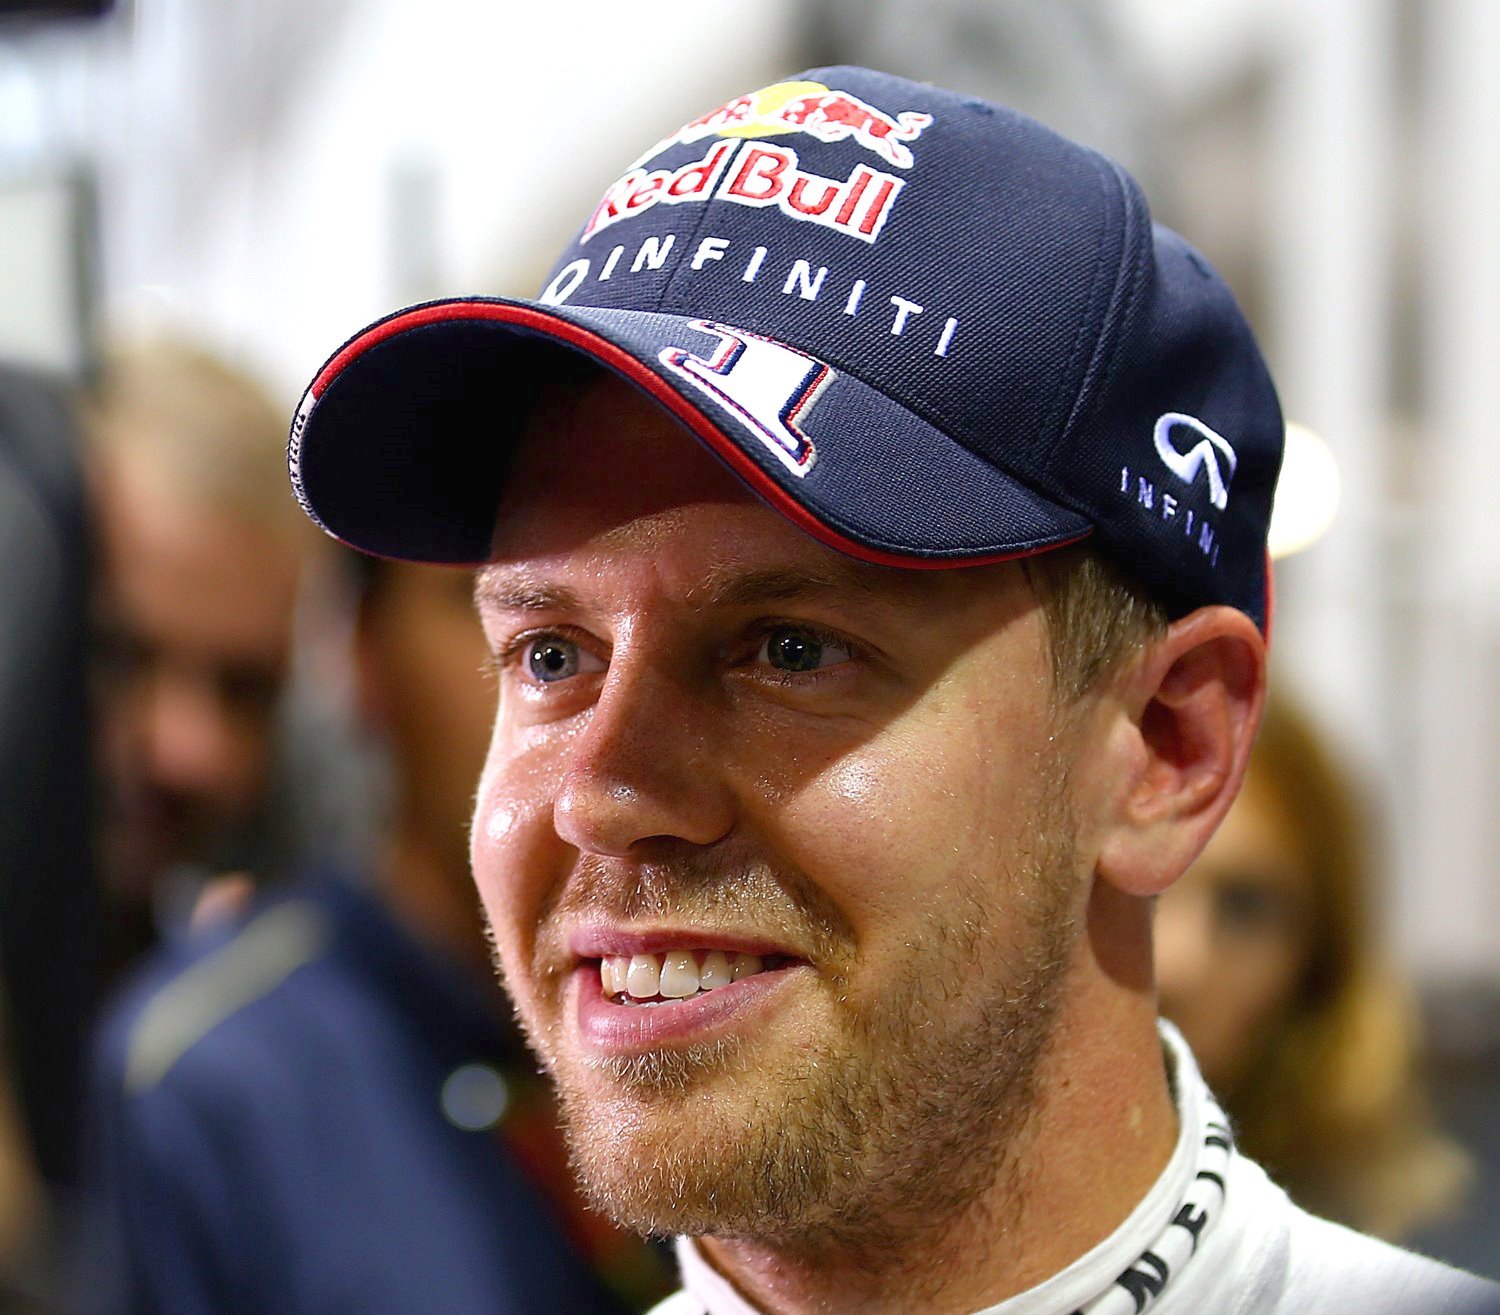 Vettel was paid over $20M per year by Red Bull